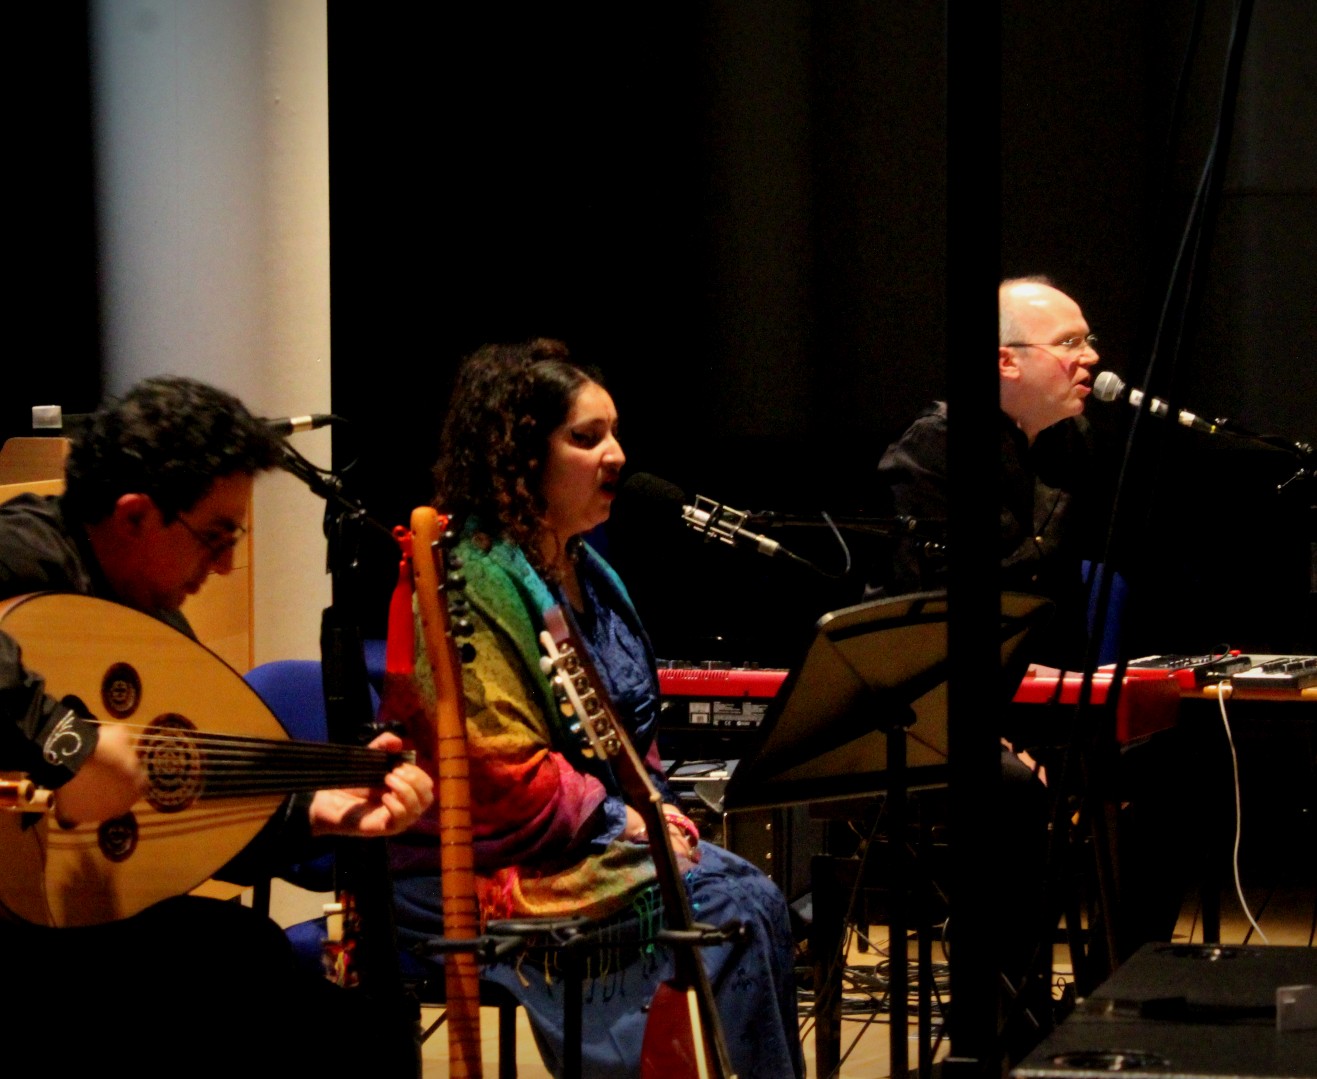 Photograph of the band Electric Sufi, from right to left: Mina Salama, Satnam Galsian and Rupert Till